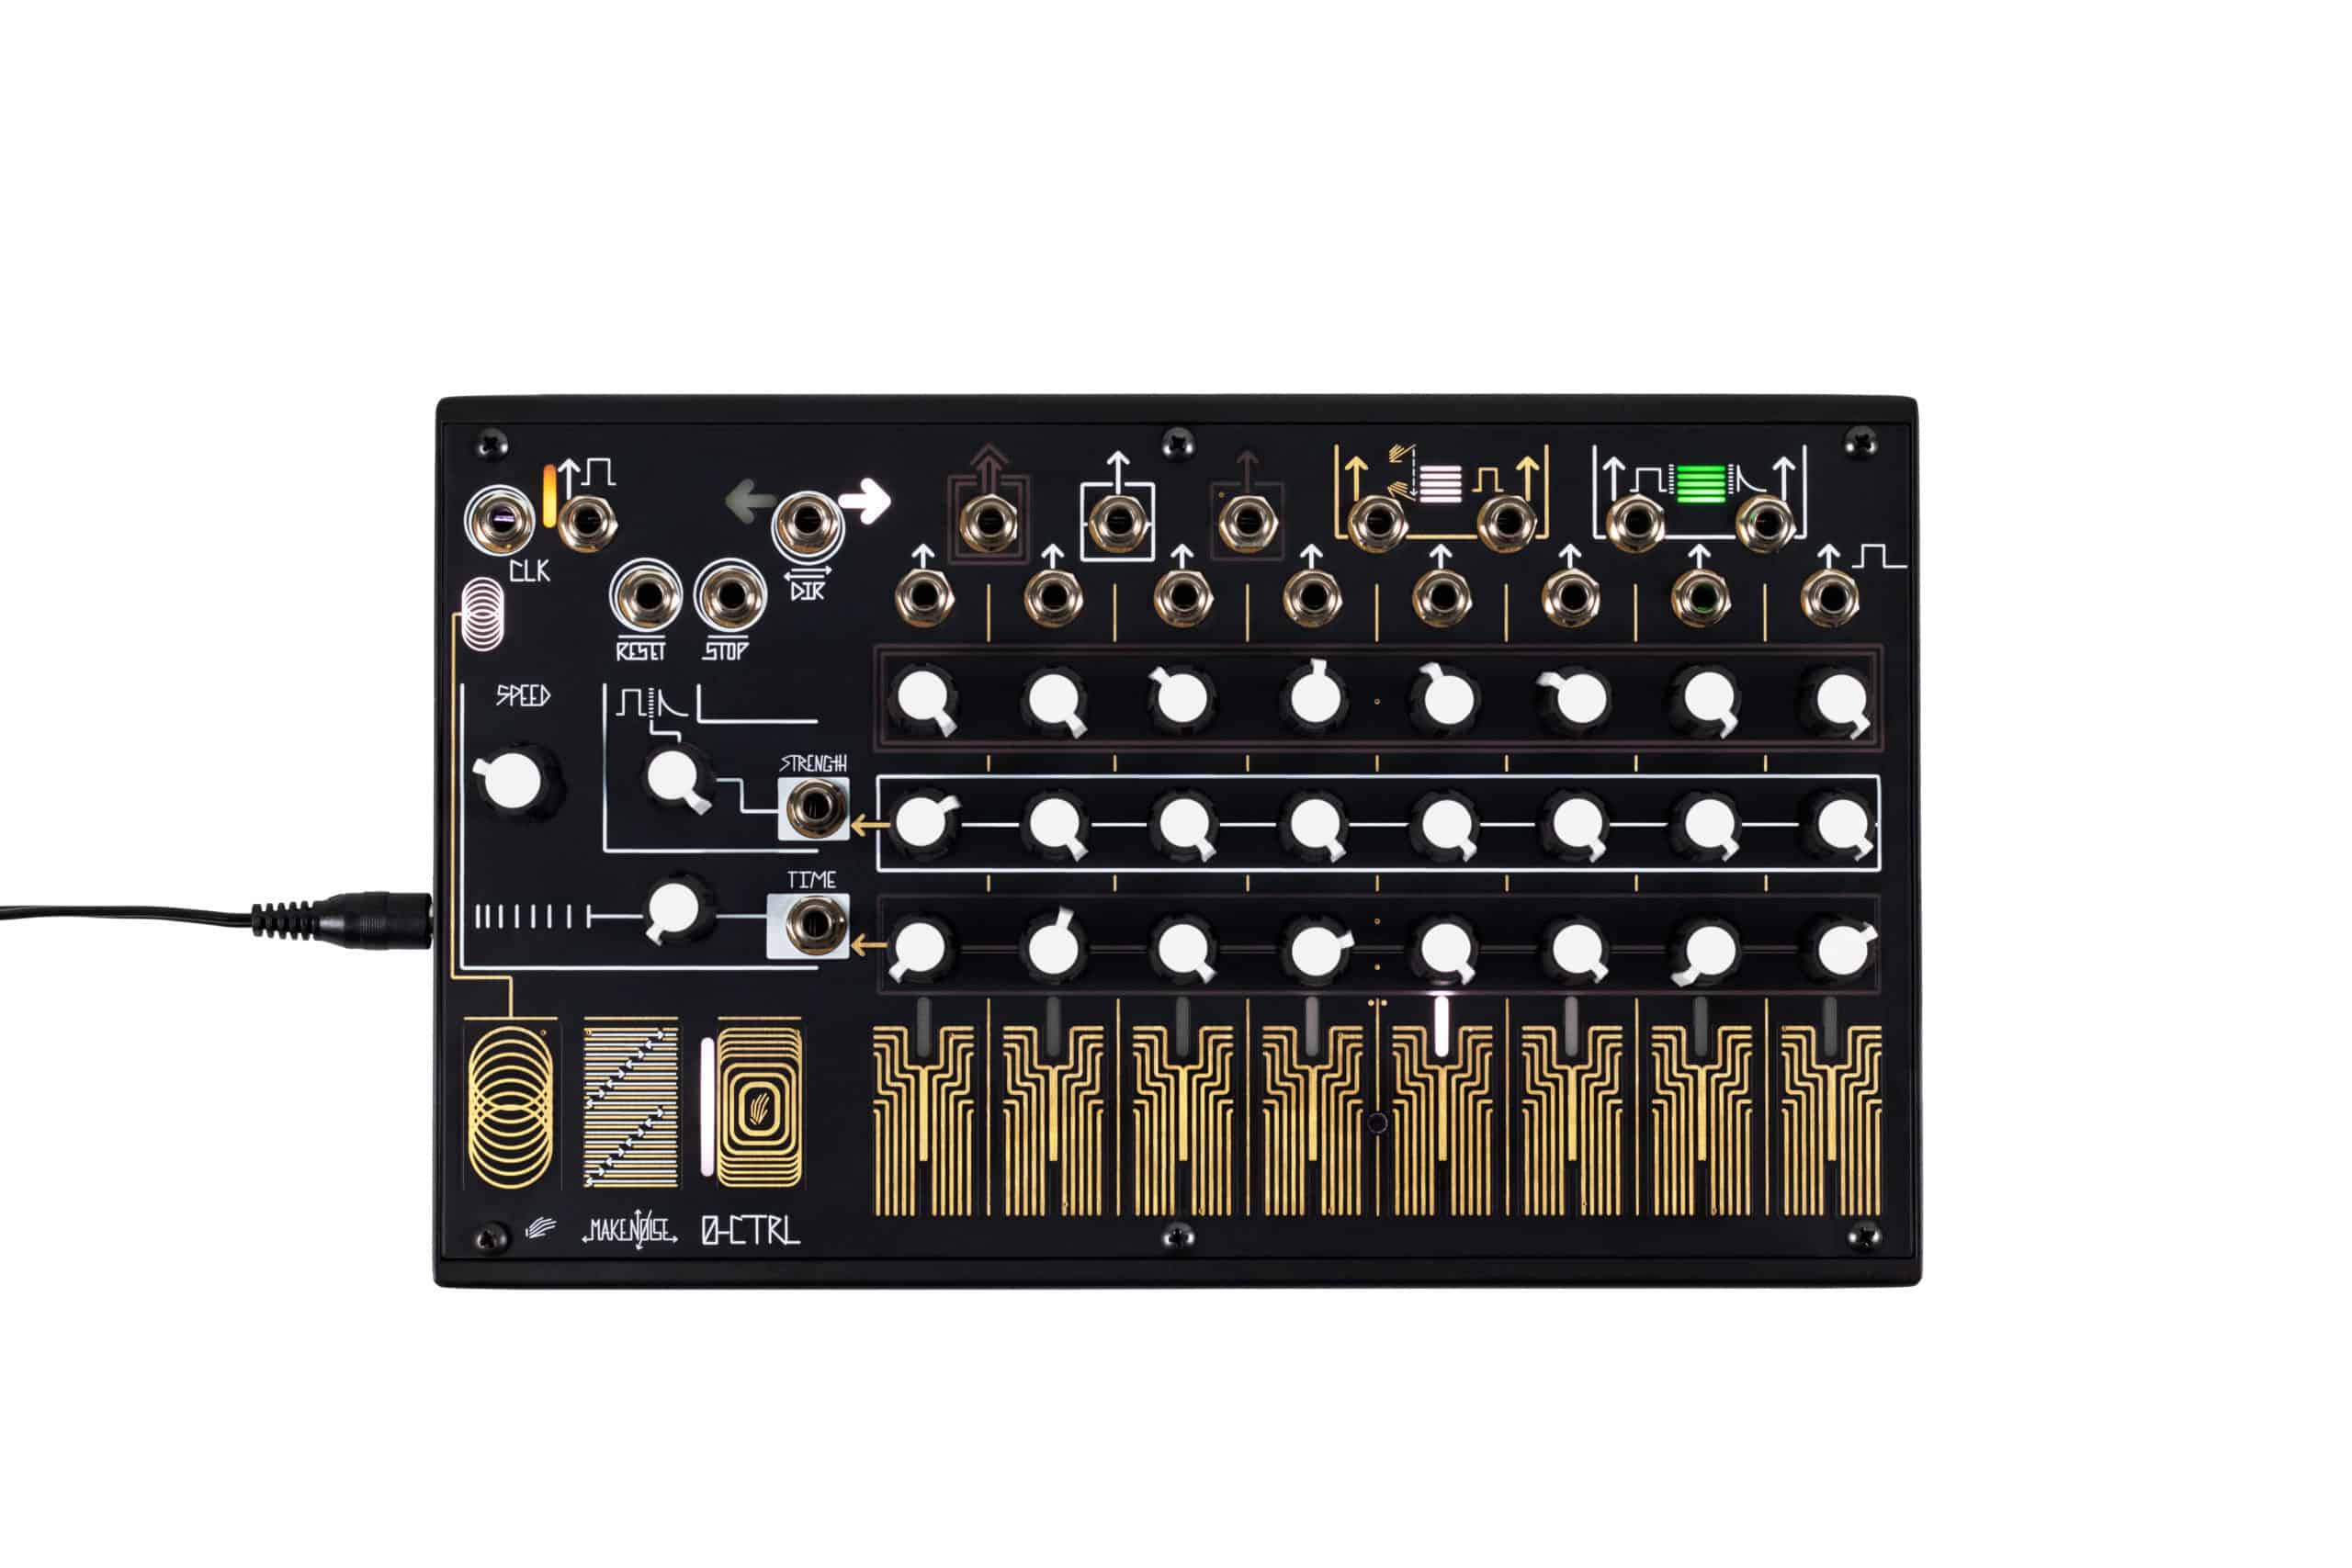 Make Noise 0-CTRL! a Sequencer not only for the 0-Coast